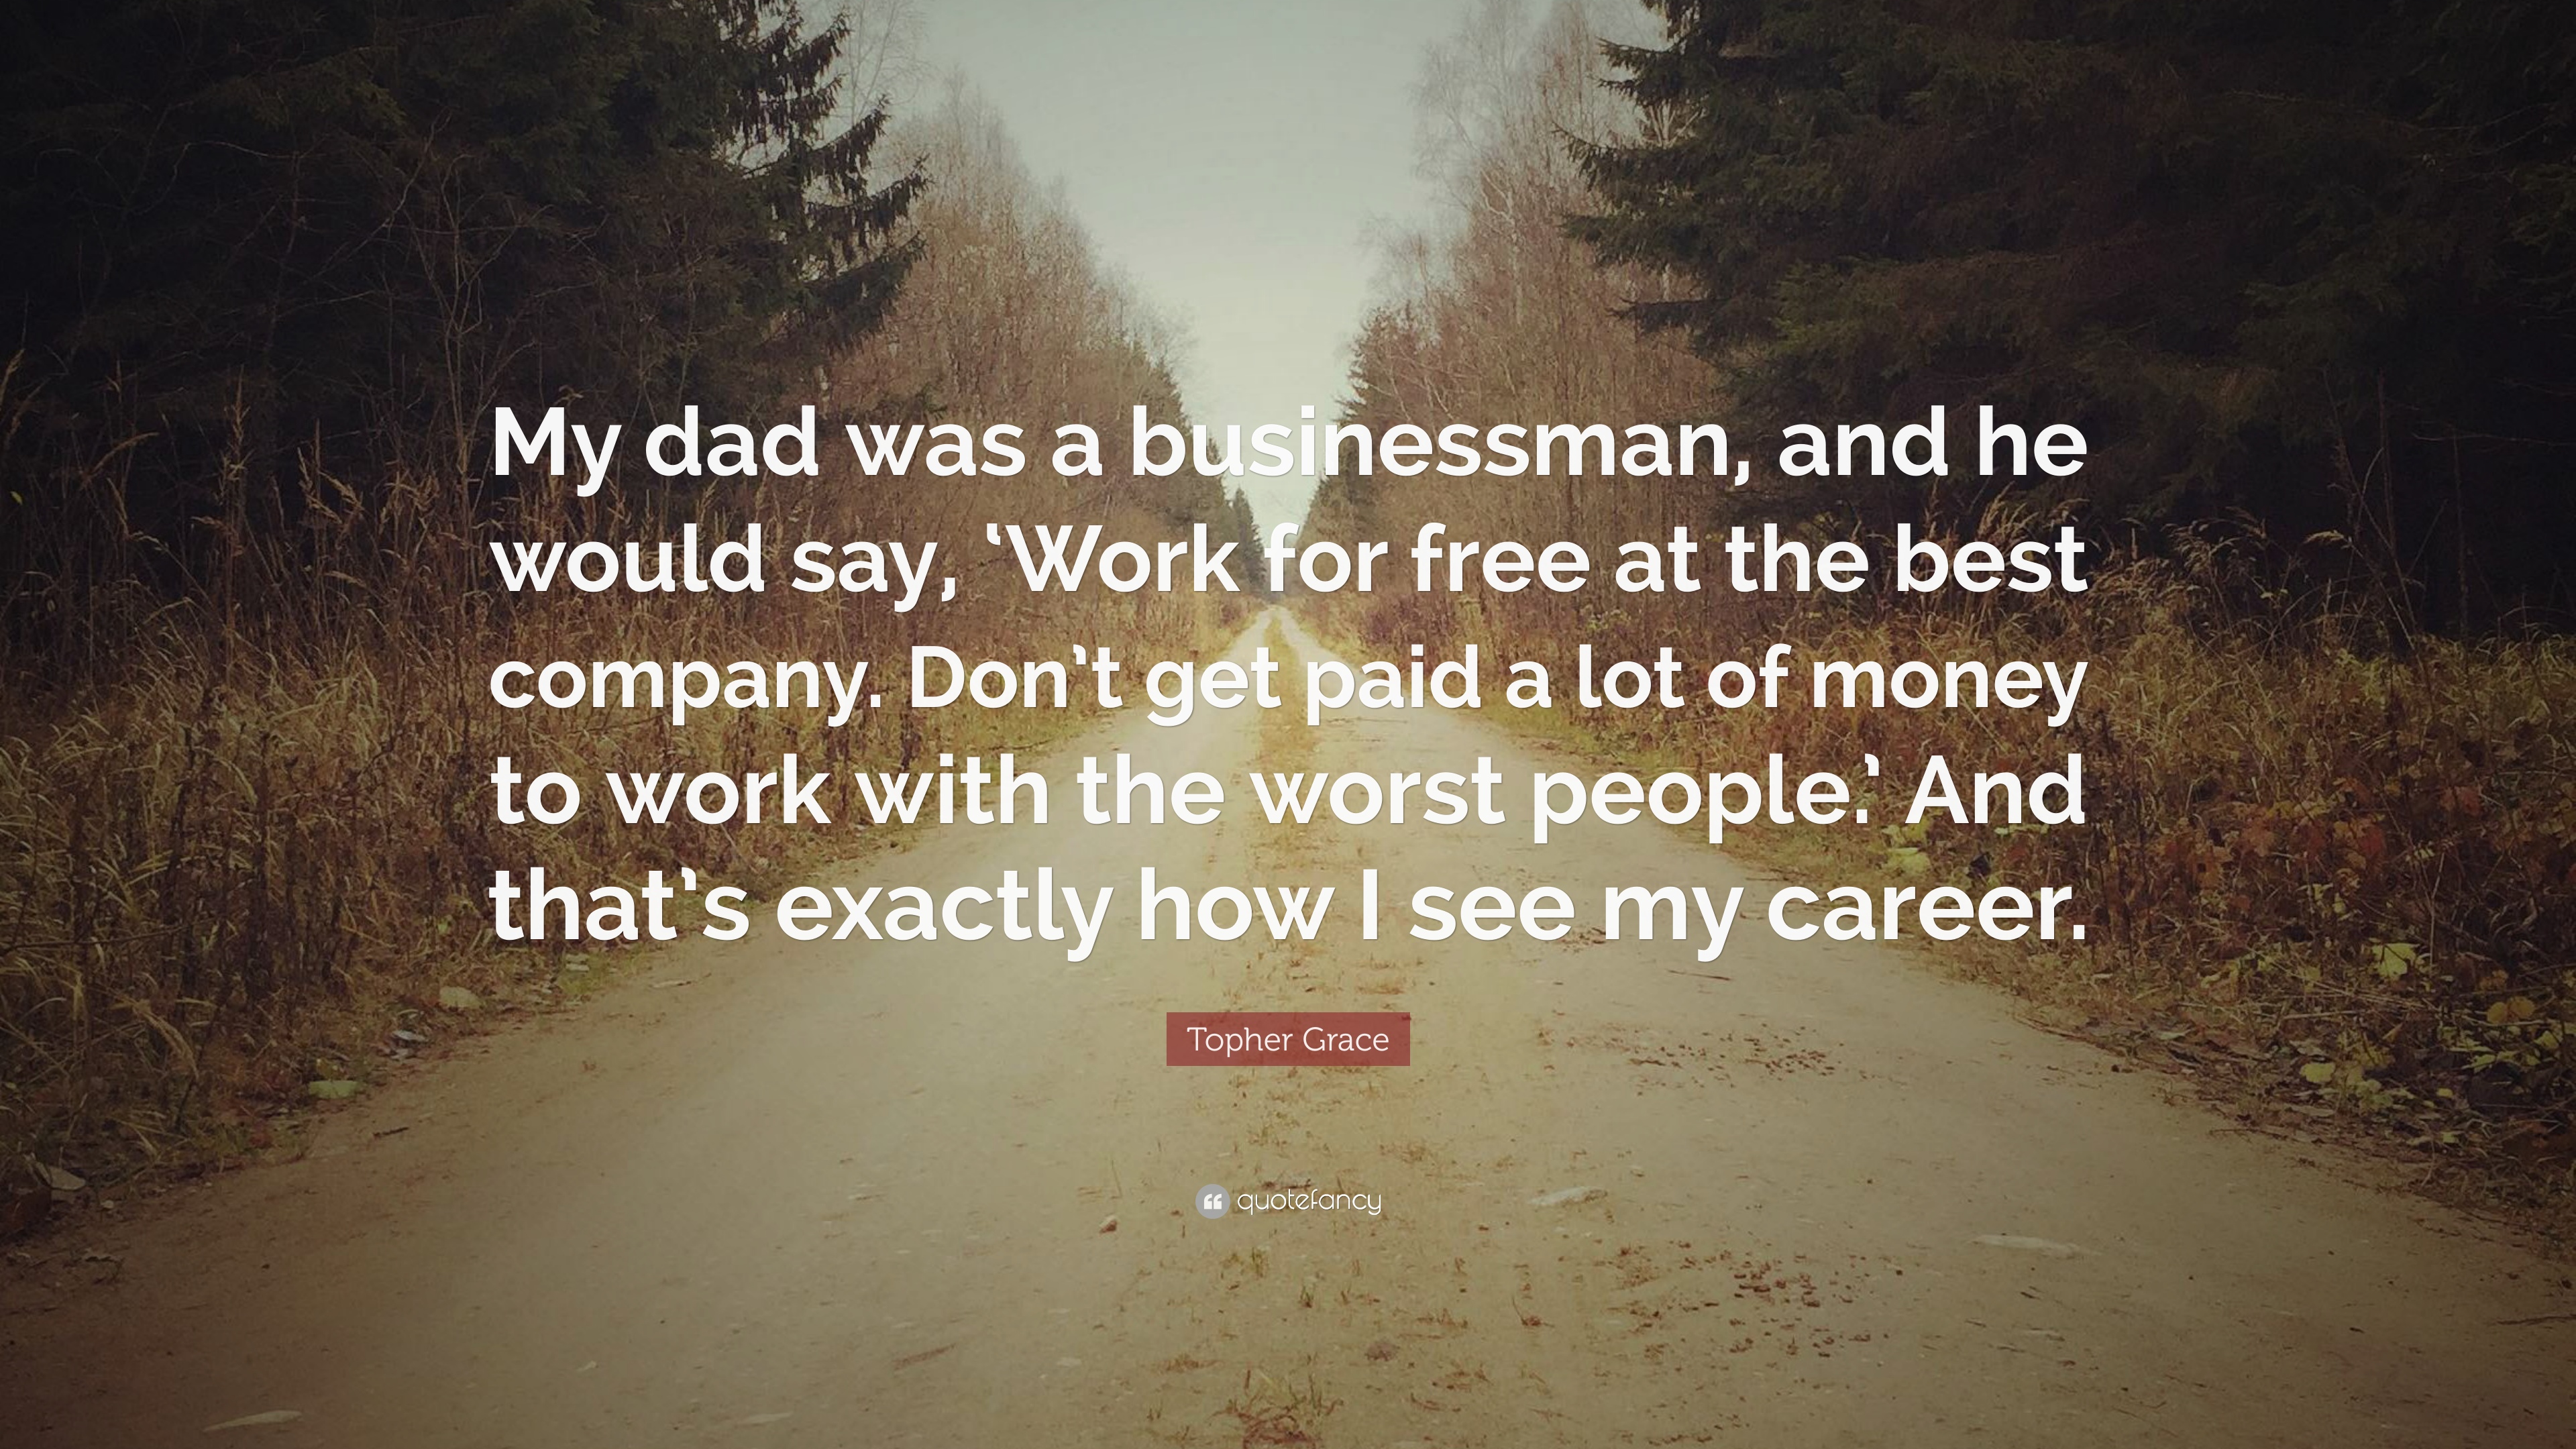 Topher Grace Quote: “My dad was a businessman, and he would say